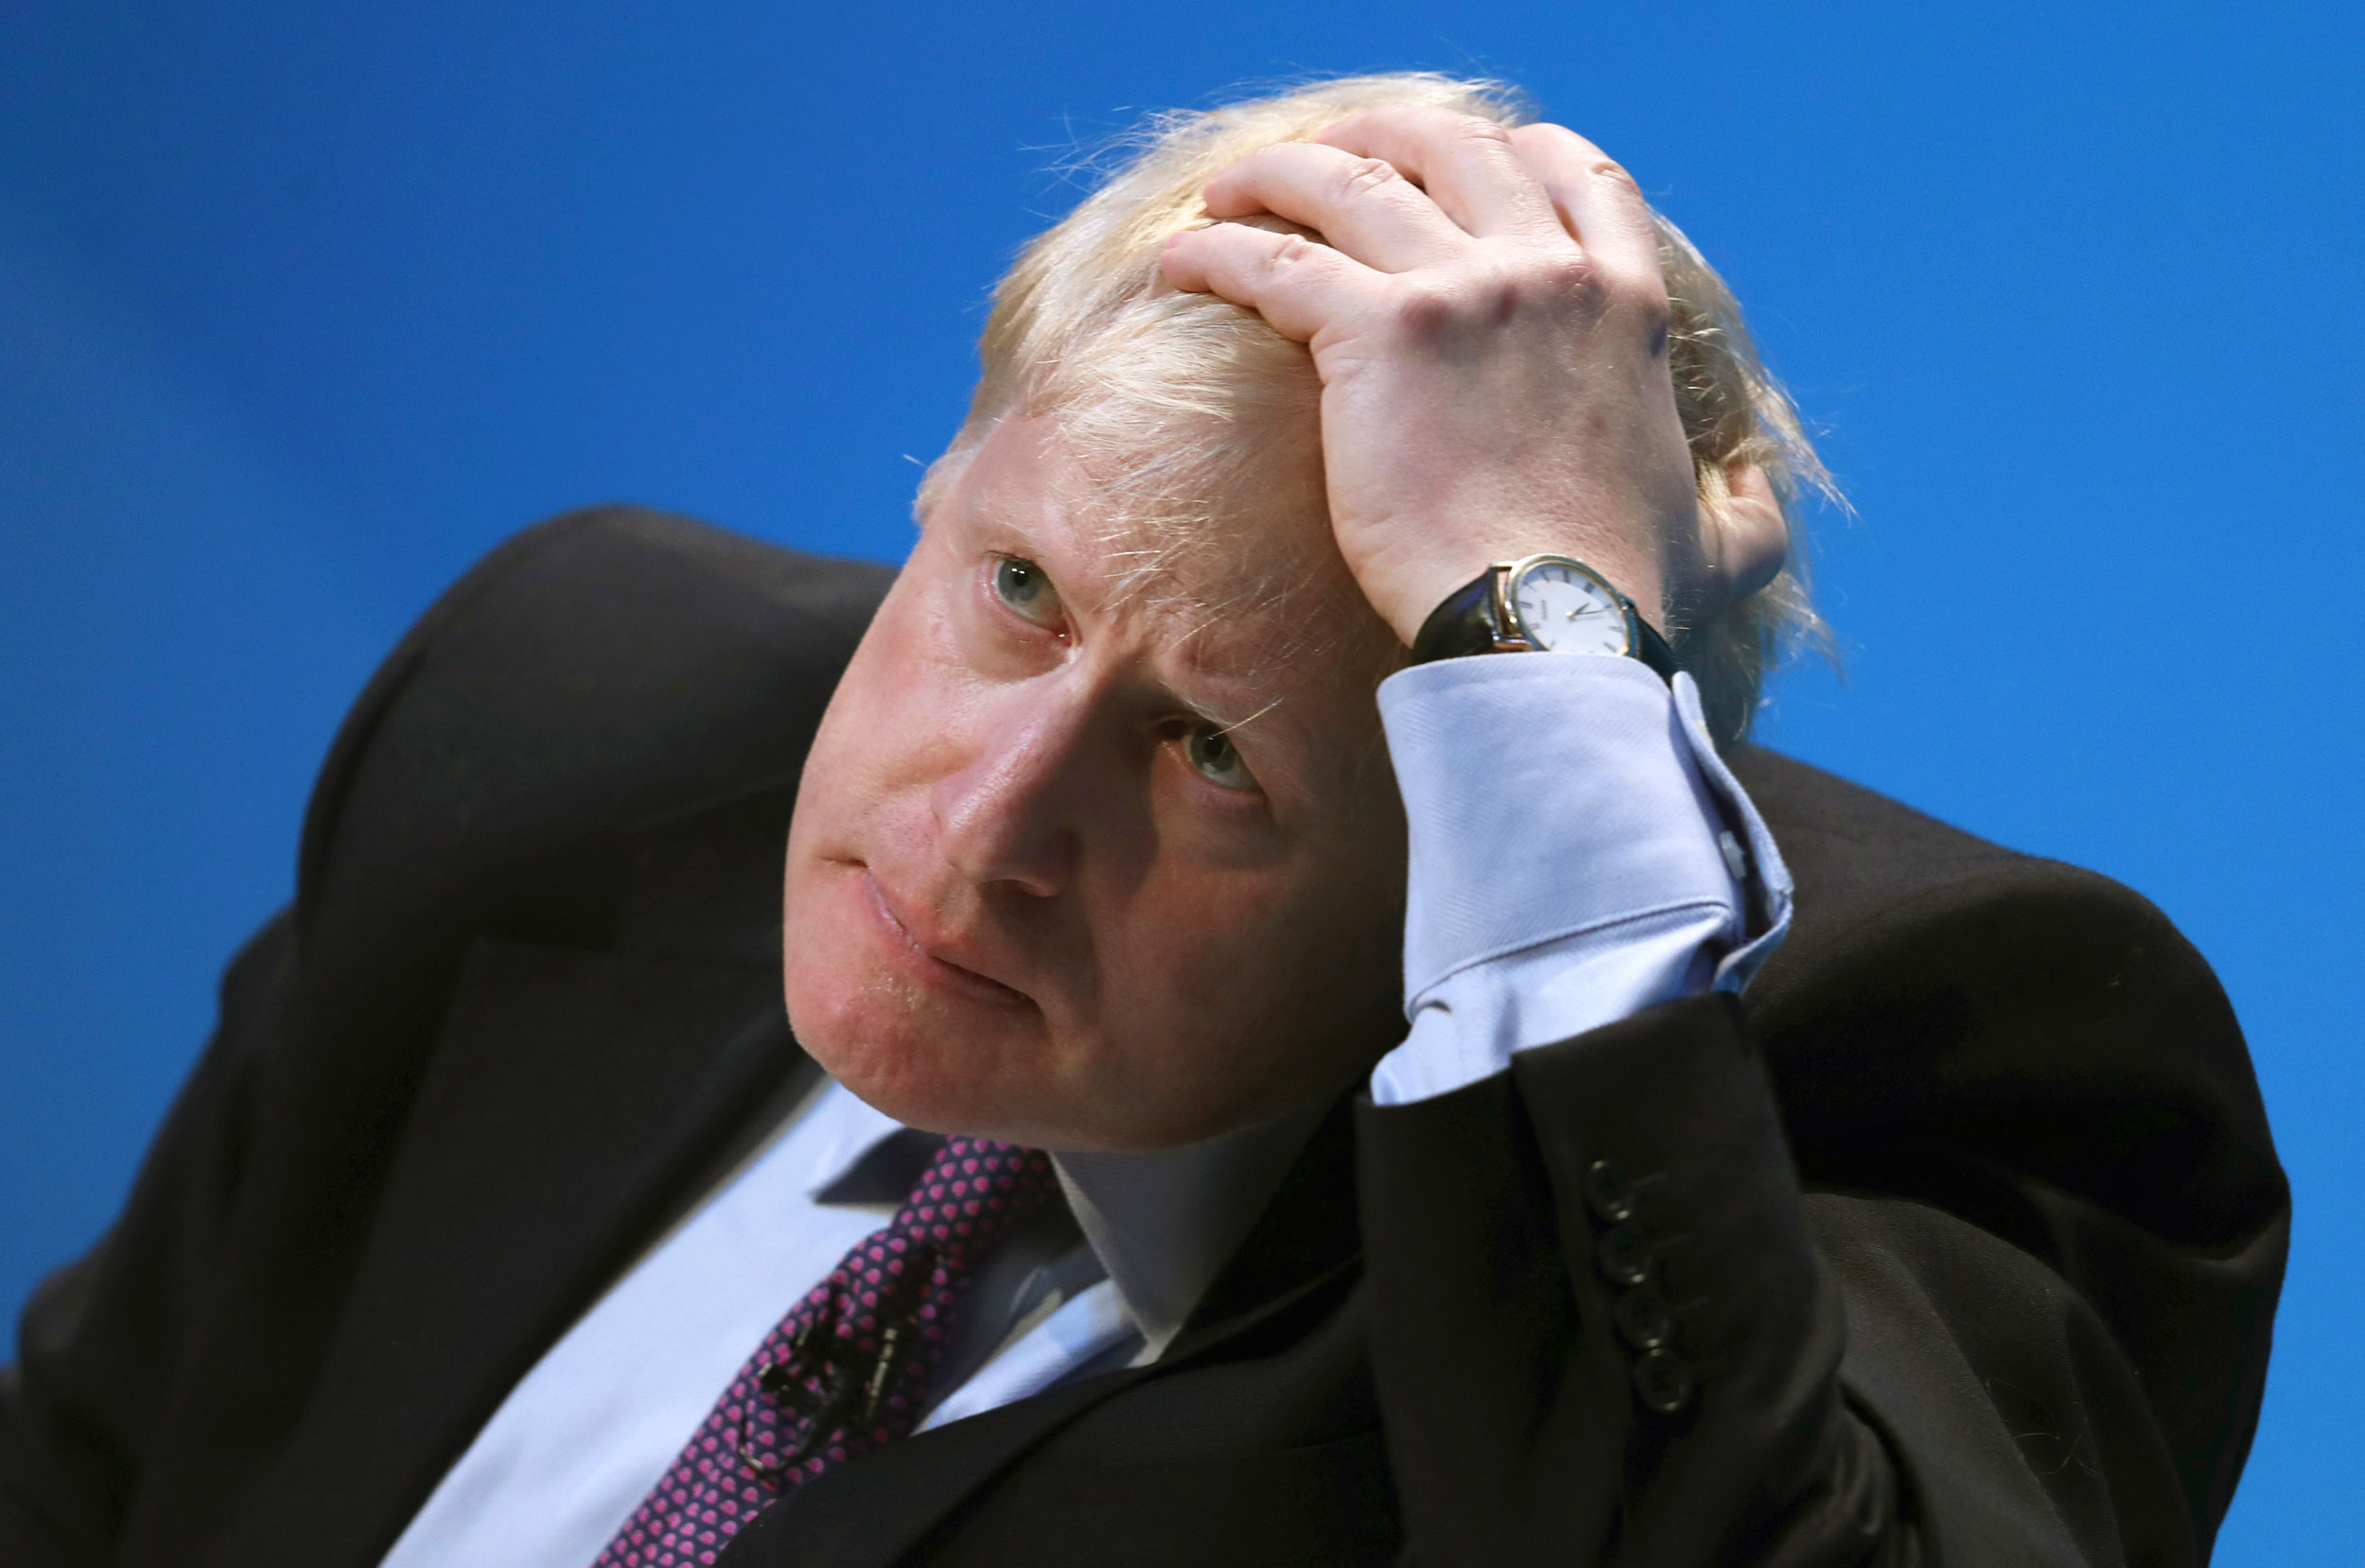 Britain's Conservative party leadership candidate Boris Johnson during the first party hustings at the ICC in Birmingham, England, on June 22, 2019.